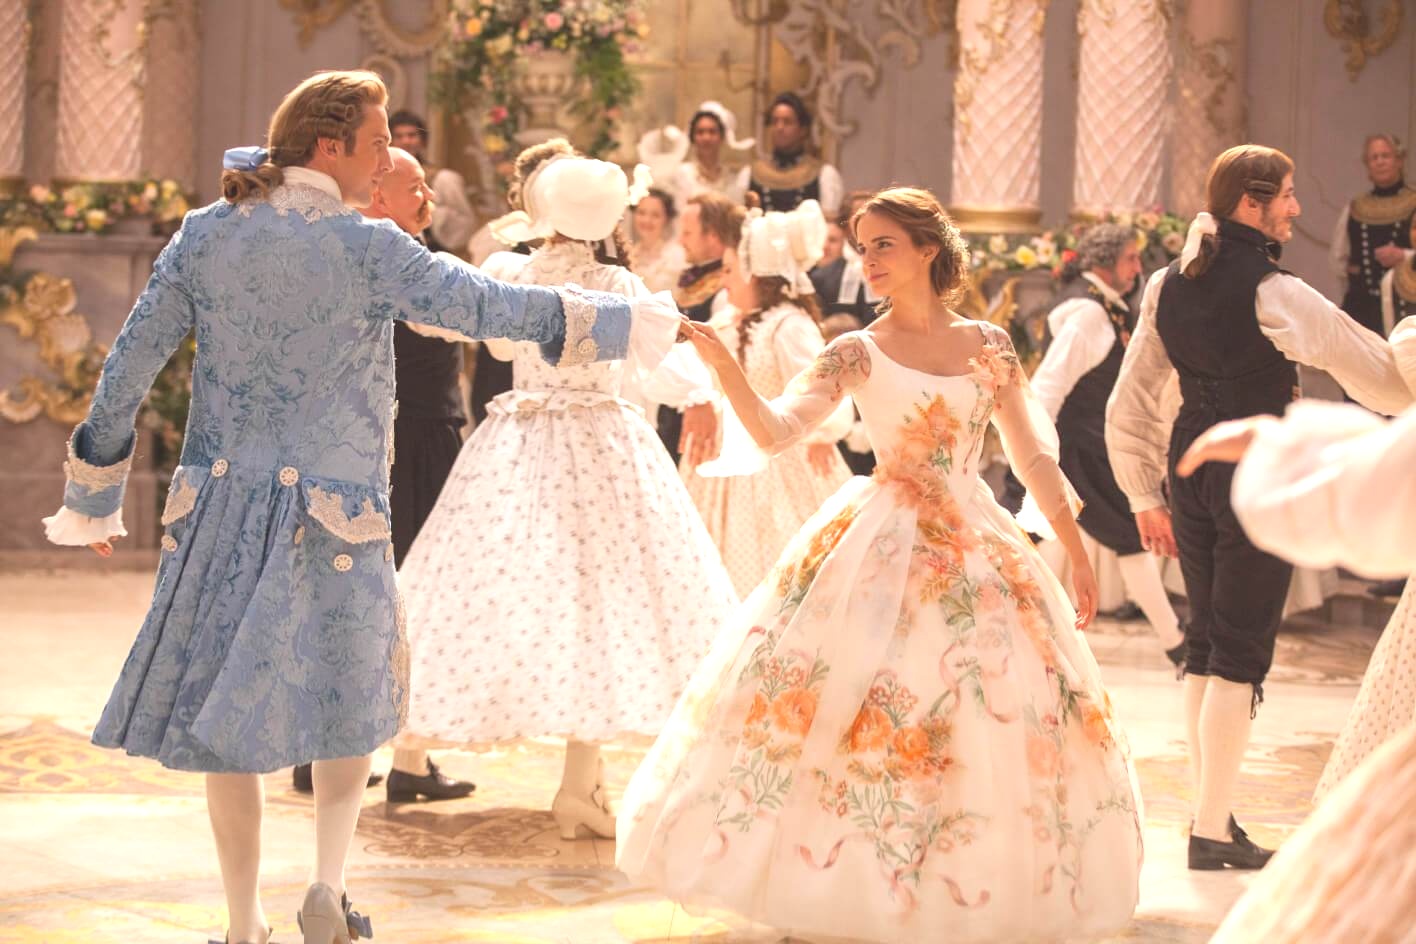 17-beauty-and-the-beast-wedding-dress-wonderful-10-inspirations-from-movies-image.jpg